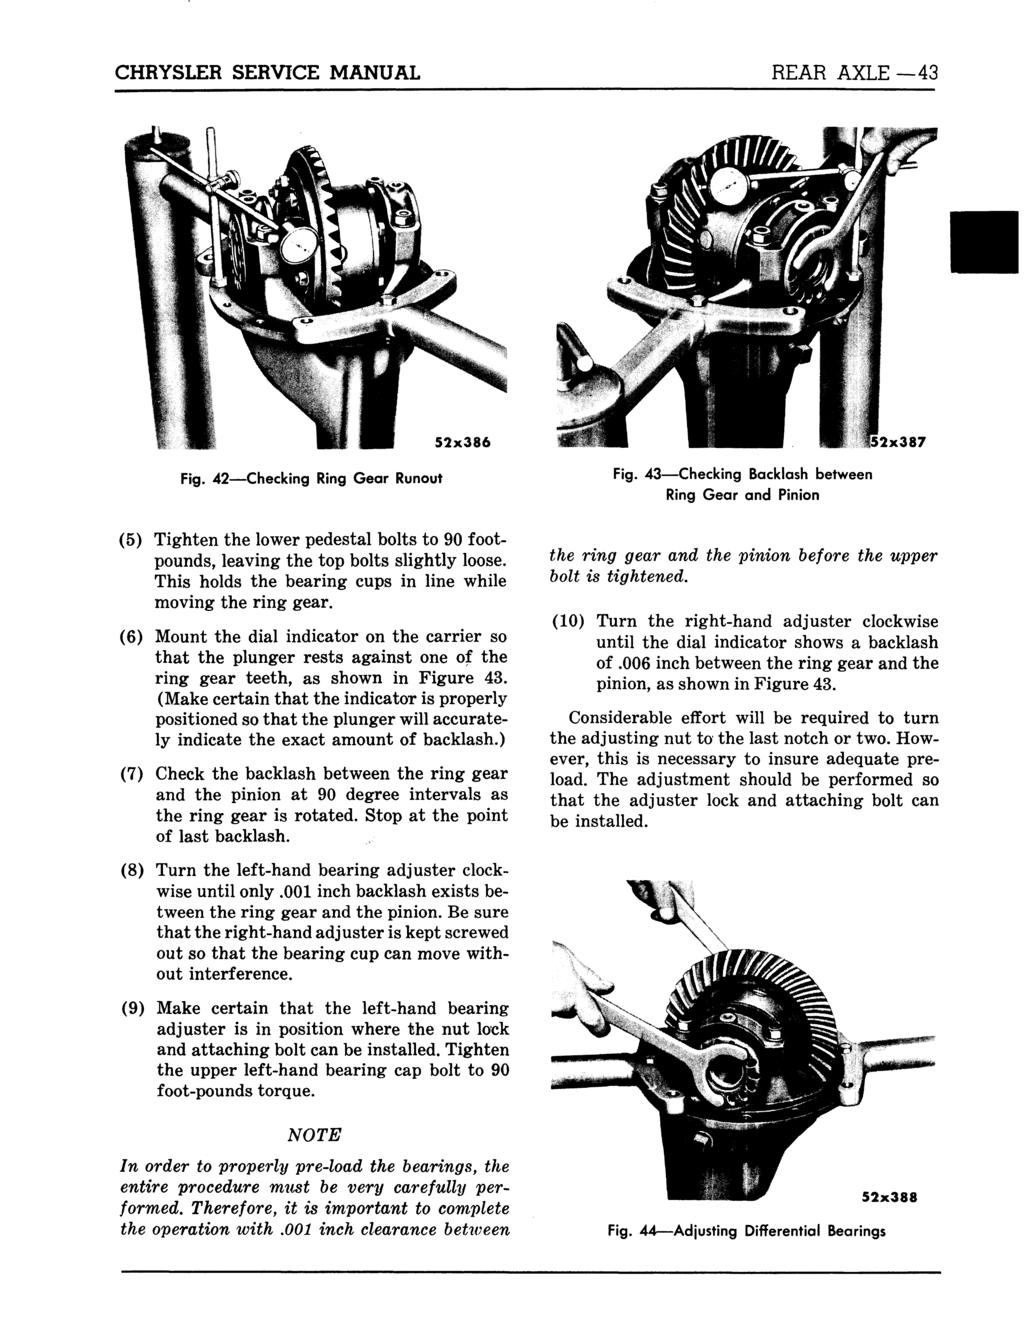 CHRYSLER SERVICE MANUAL REAR AXLE 43 52x386 2x387 Fig. 42 Checking Ring Gear Runout (5) Tighten the lower pedestal bolts to 90 footpounds, leaving the top bolts slightly loose.